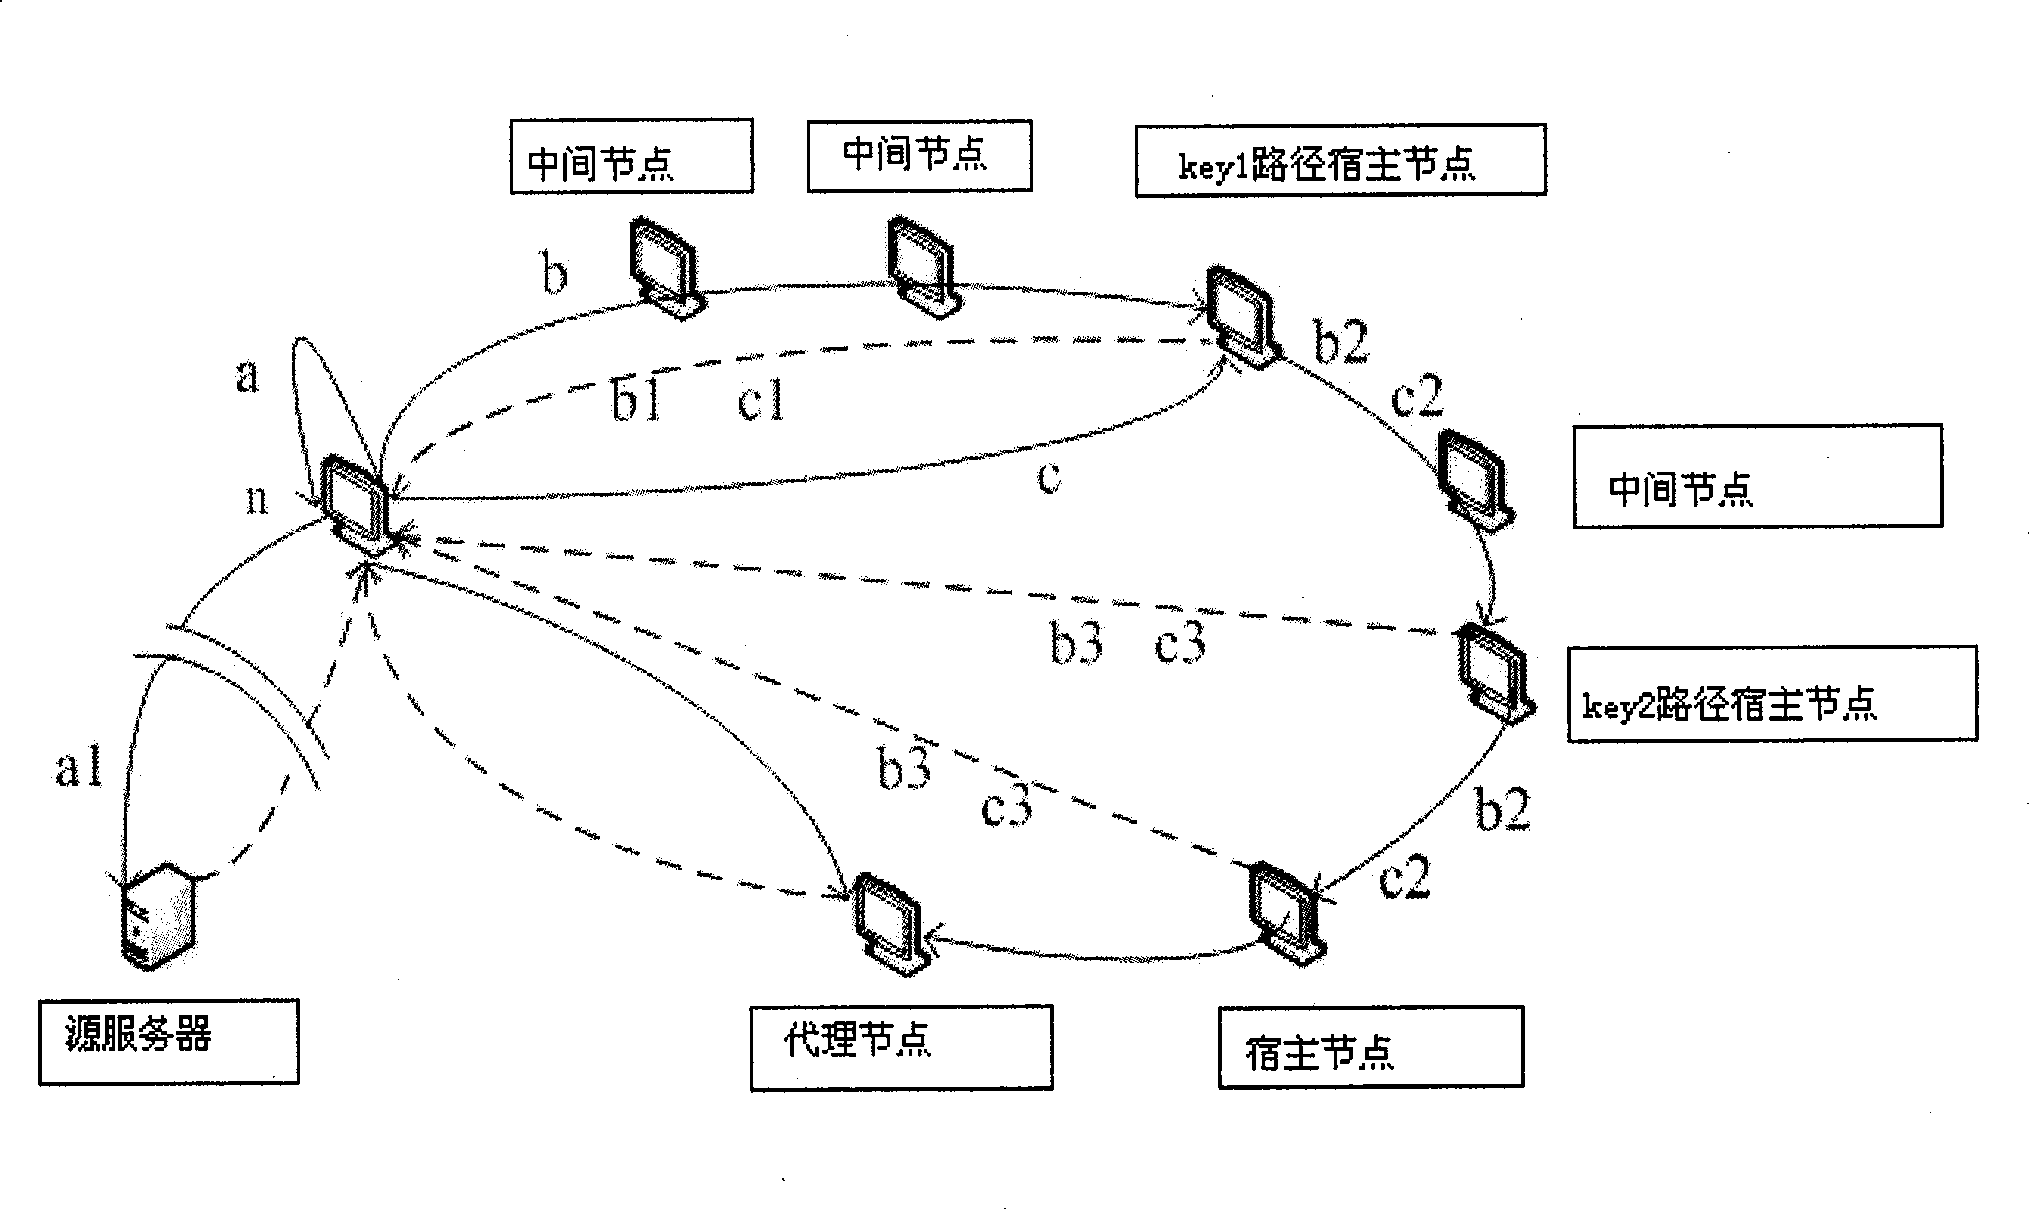 Rapid data positioning method based on path division and multi-distributed-directory